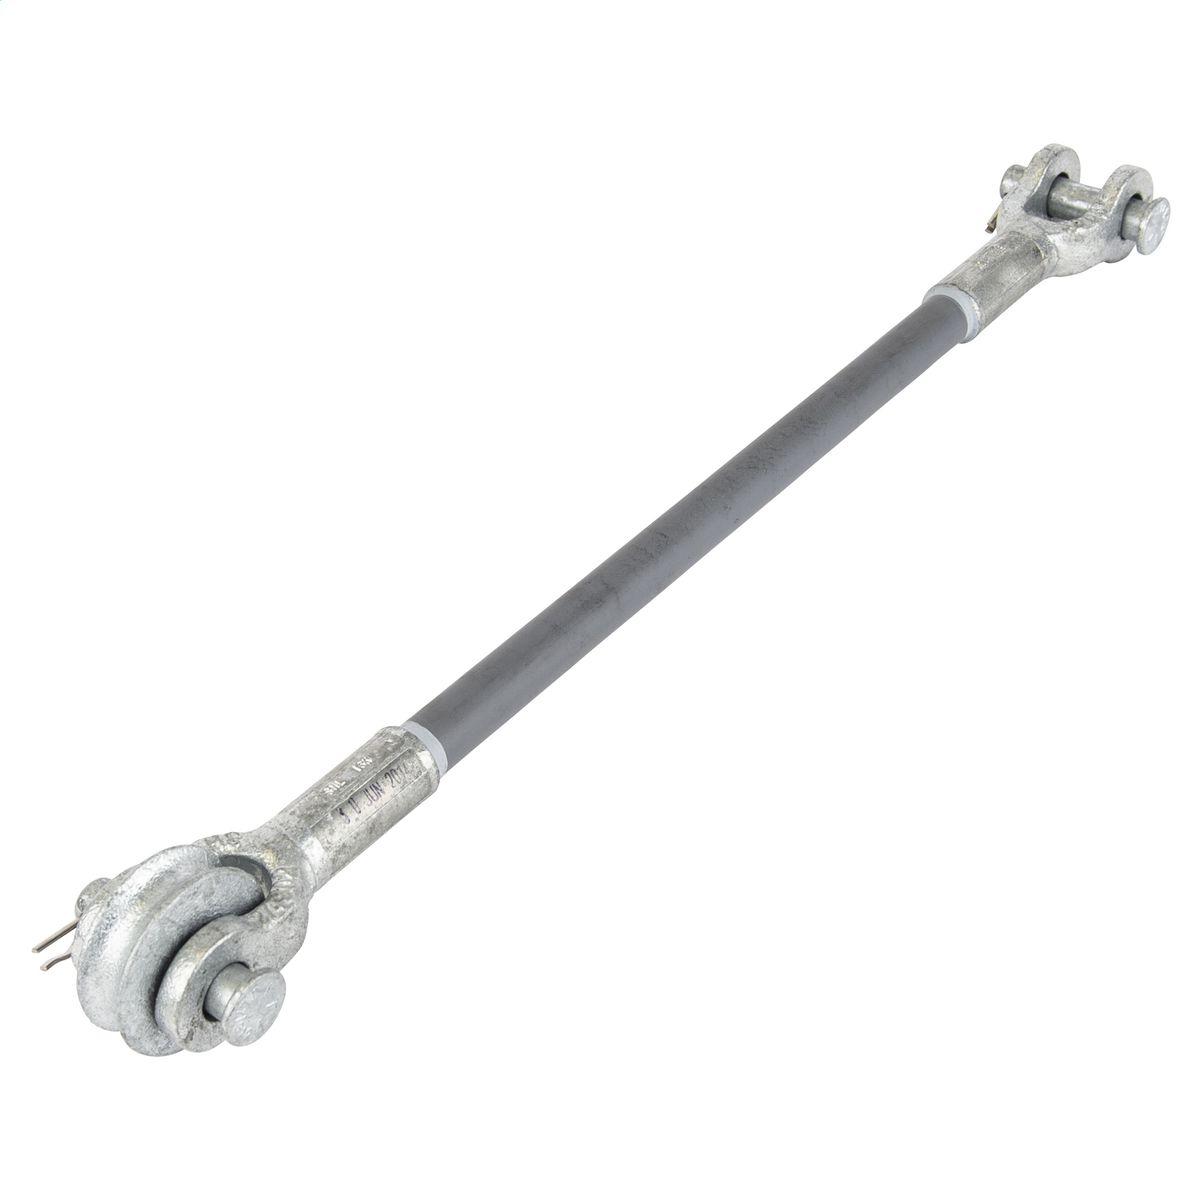 Hubbell GS36018CC1SC 18" Silicone Coated Fiberglass Guy Strain; 36,000 lb Series; Clevis / Clevis + 1 Roller 